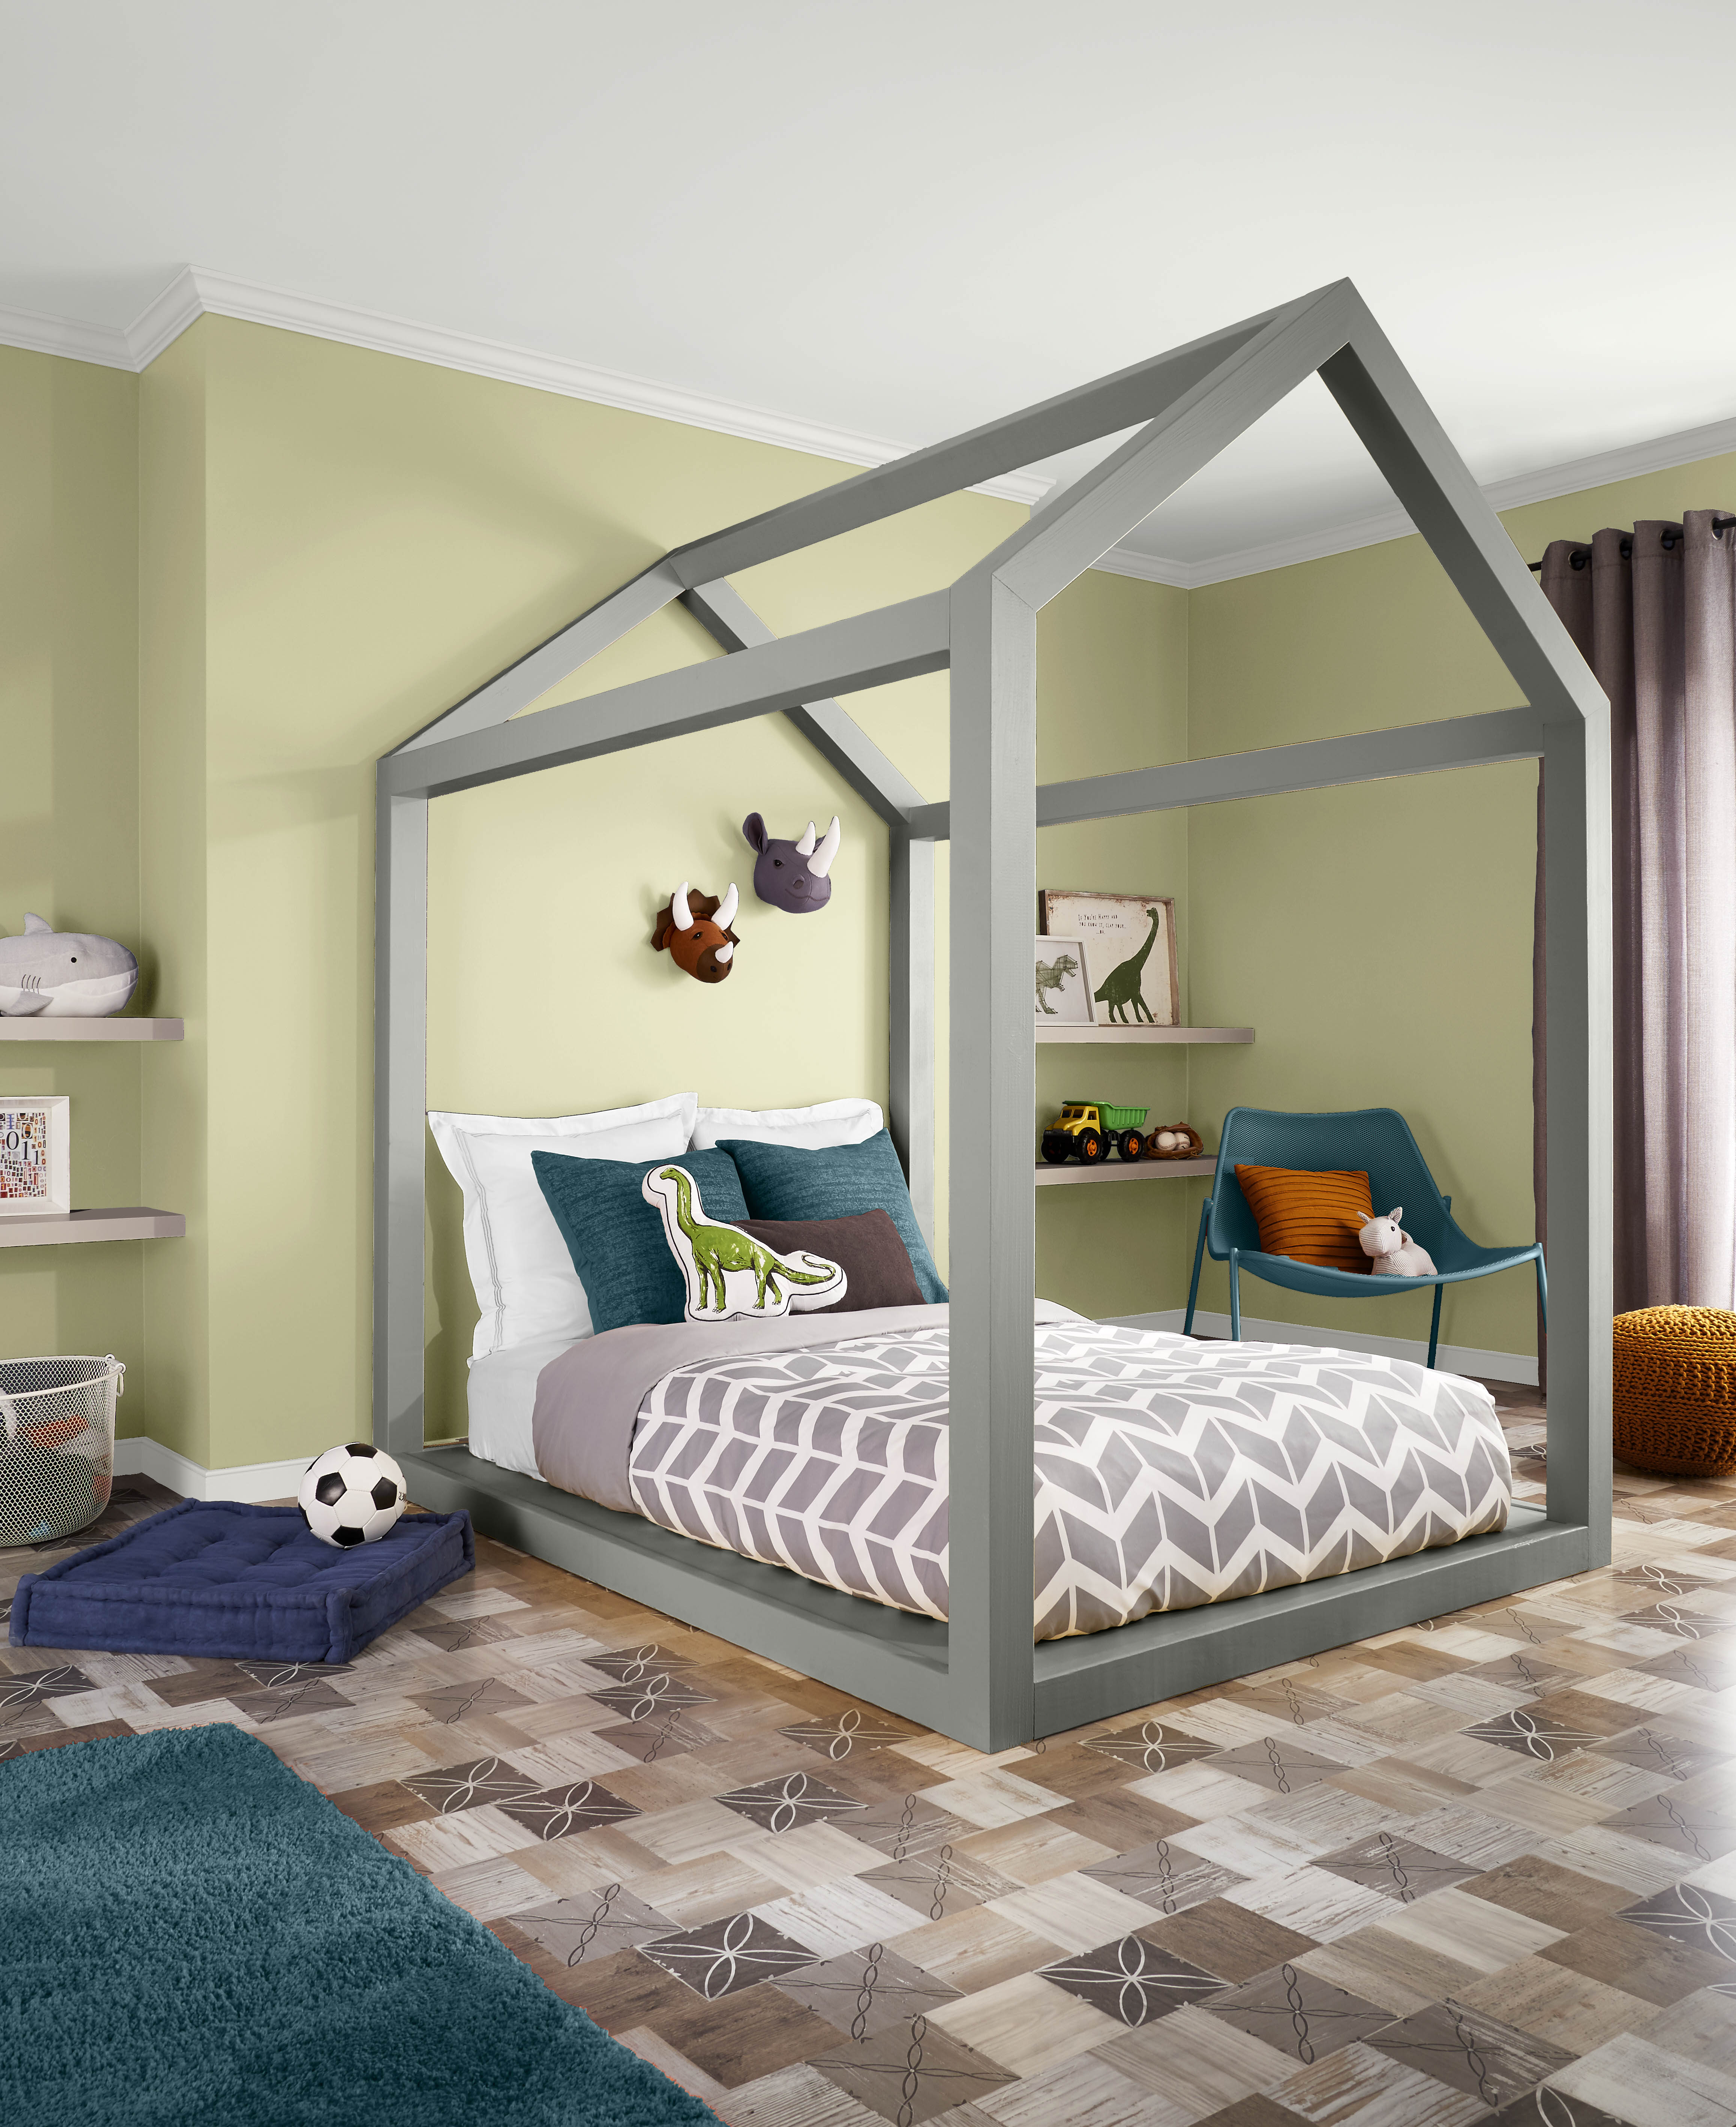 A kids room with walls in the colour Hybrid, styled with a playful bedframe and pops of grey, teal, and purple in the décor and furniture 